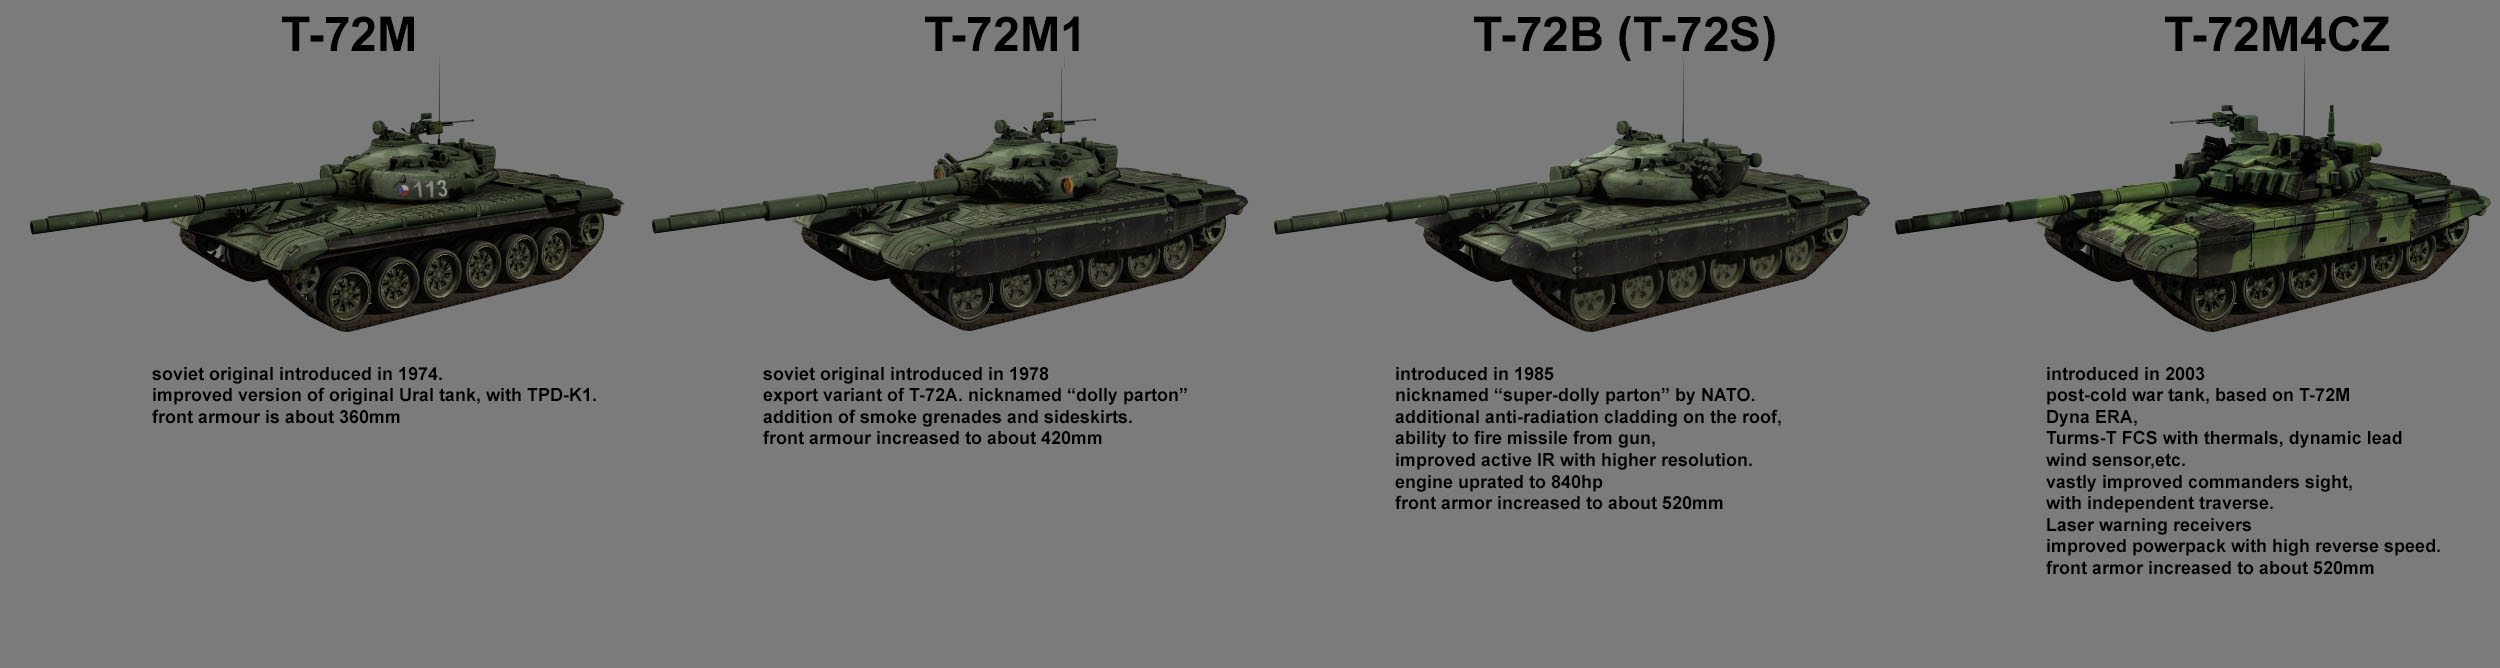 T-72_differences.jpg